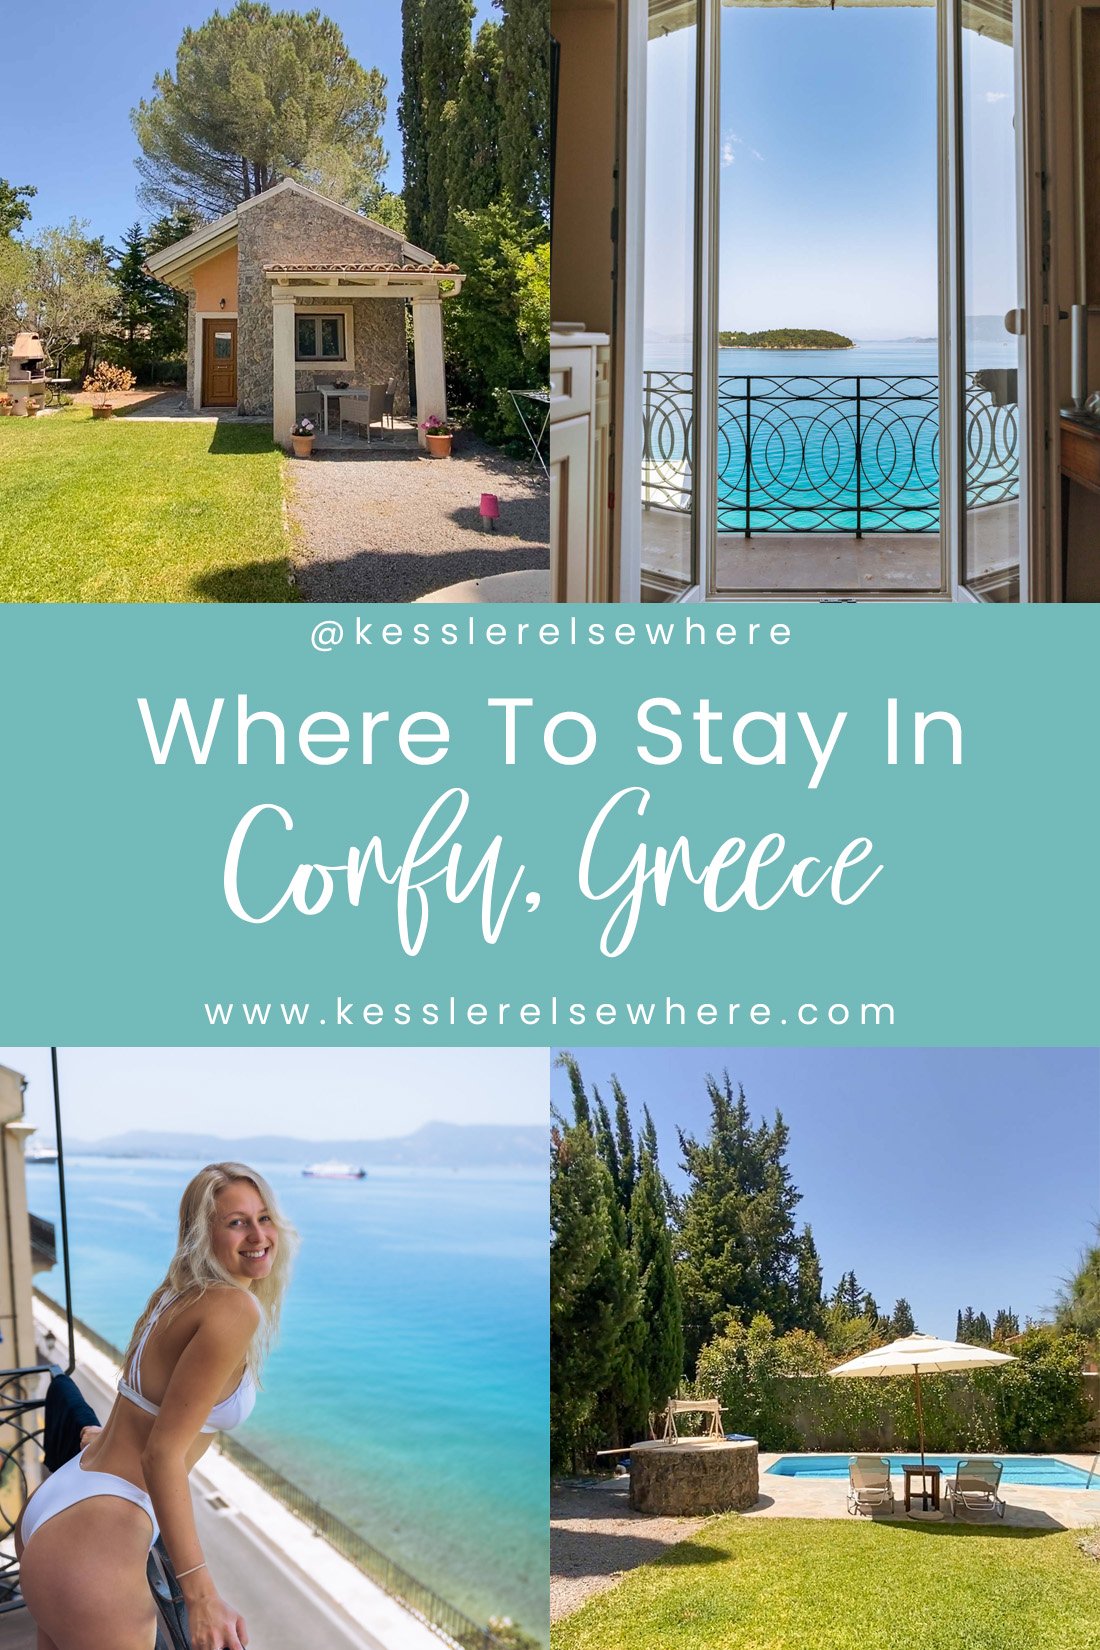 Where To Stay In Corfu, Greece